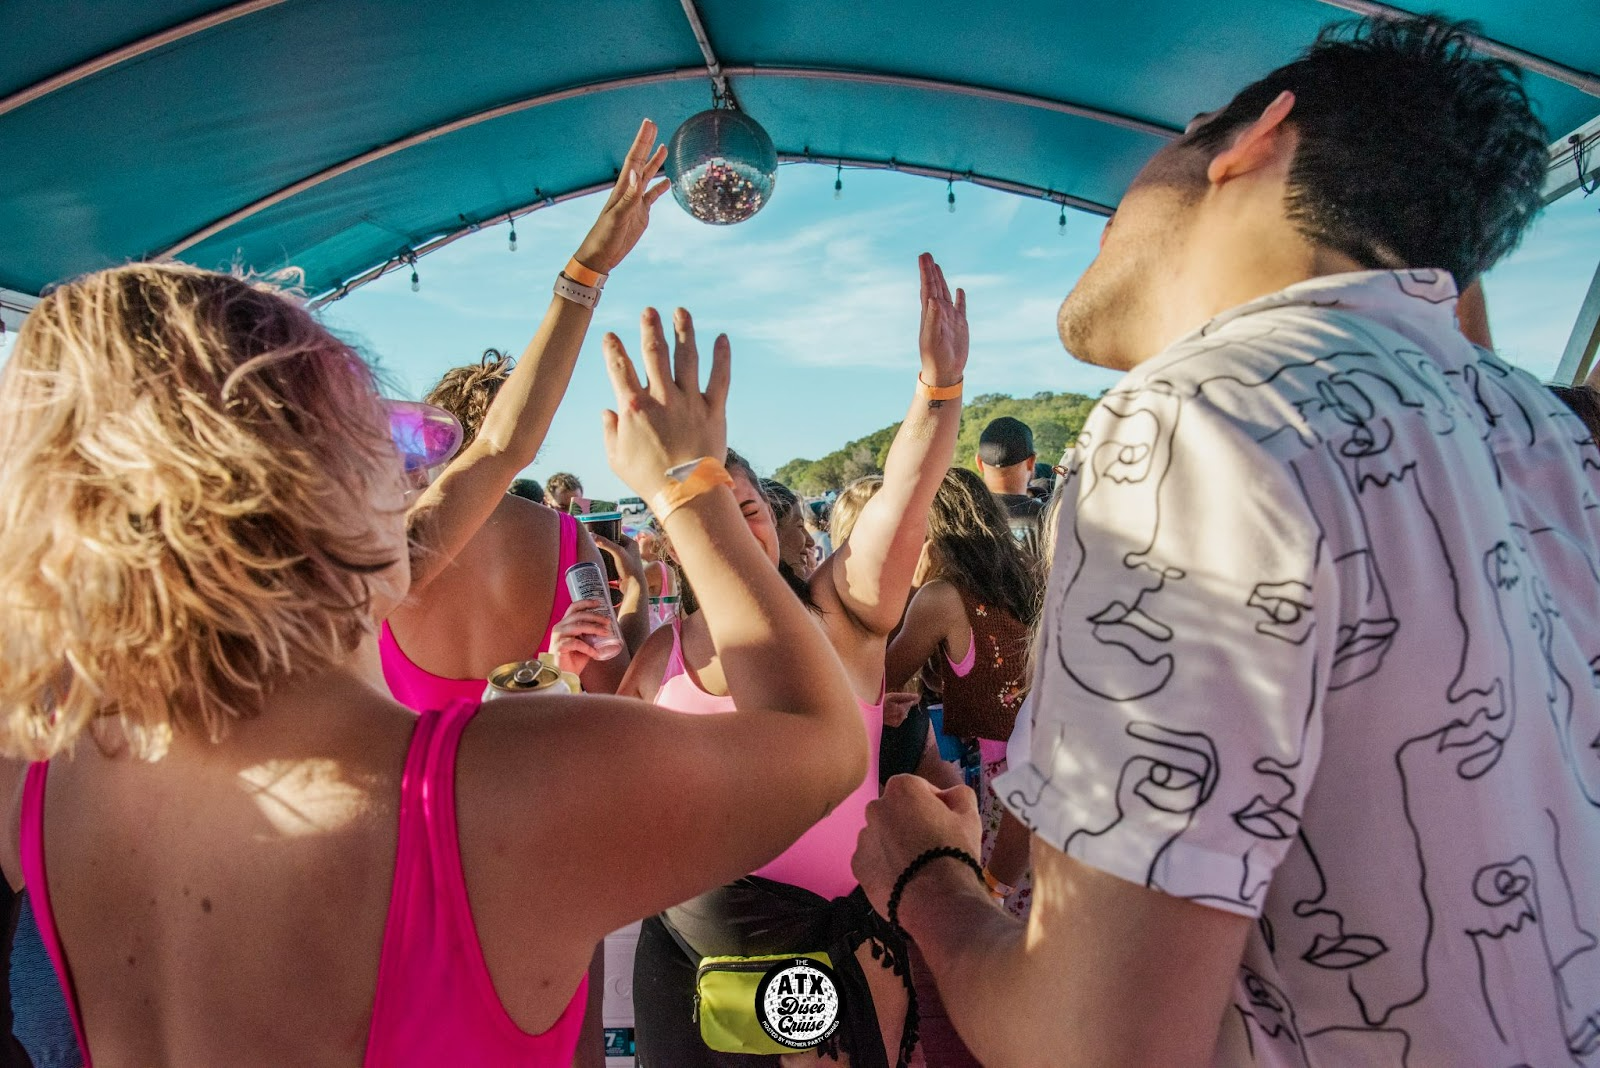 Get ready to dance and have fun on Premier Party Cruises' ATX Disco Cruise